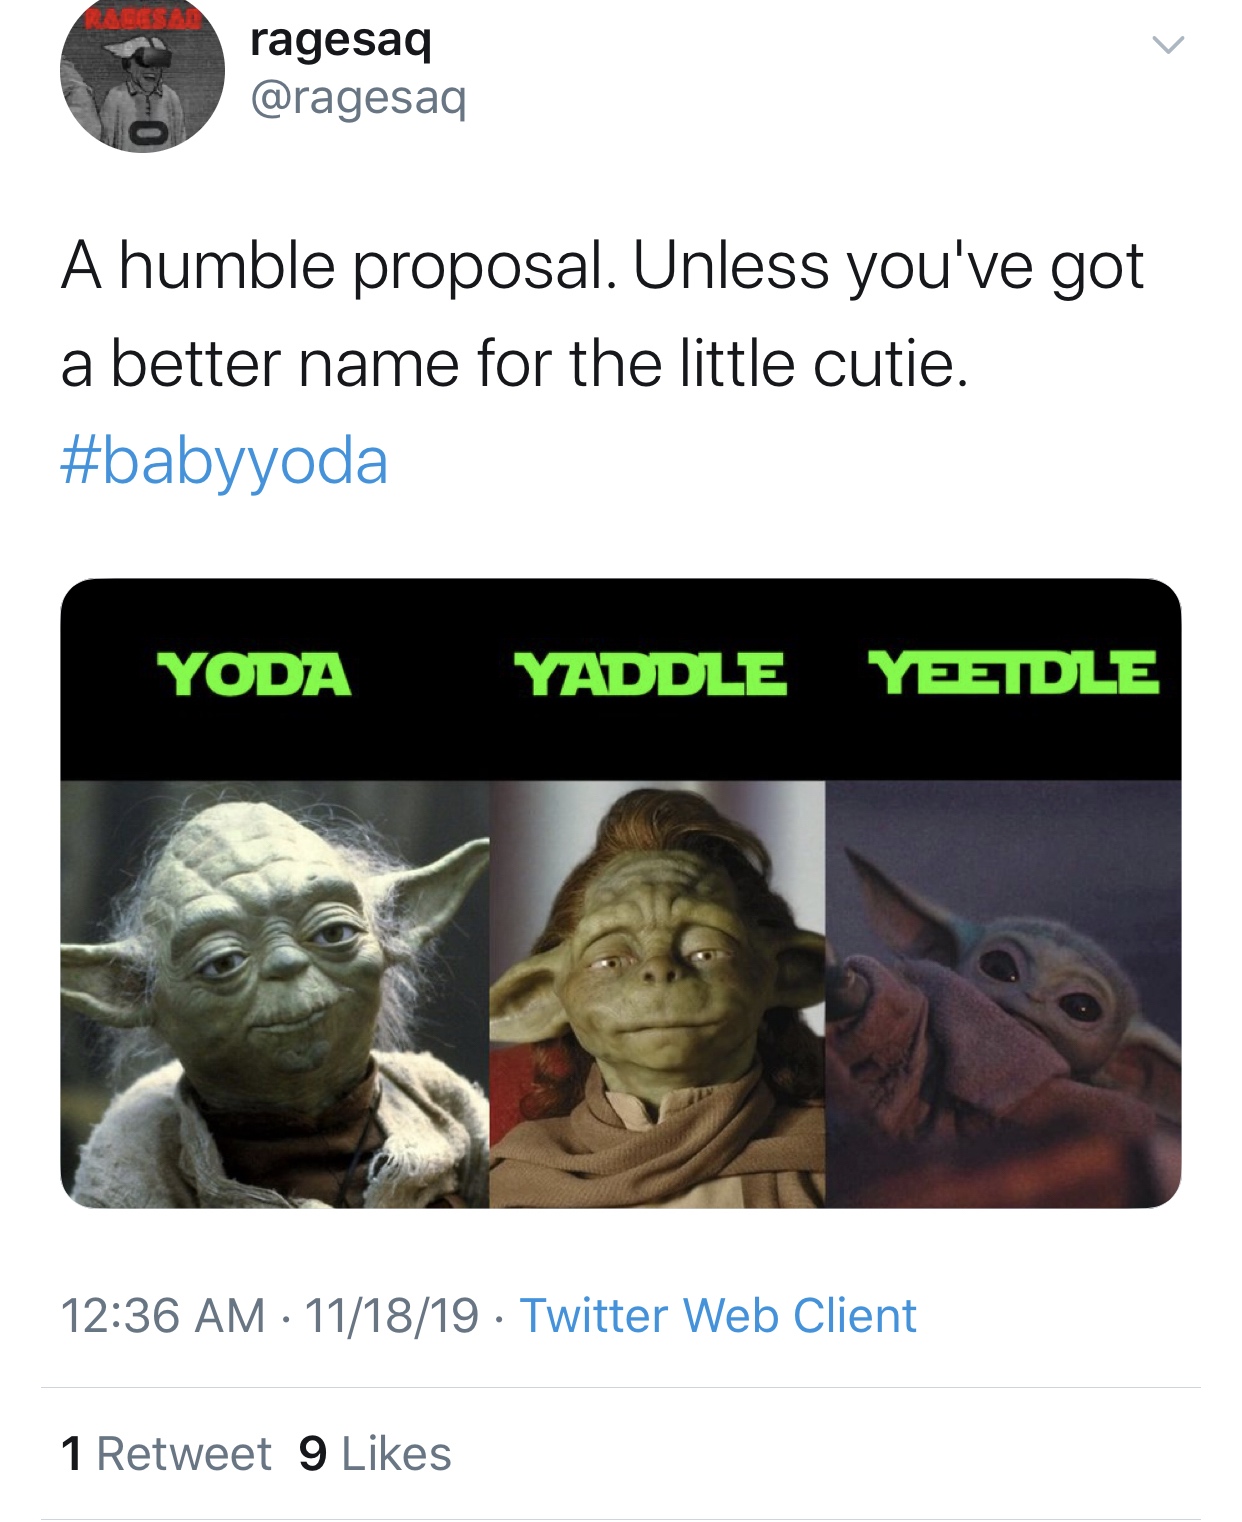 baby yoda meme - ragesaq A humble proposal. Unless you've got a better name for the little cutie. Yoda Yaddle Ybeidle 111819 Twitter Web Client 1 Retweet 9